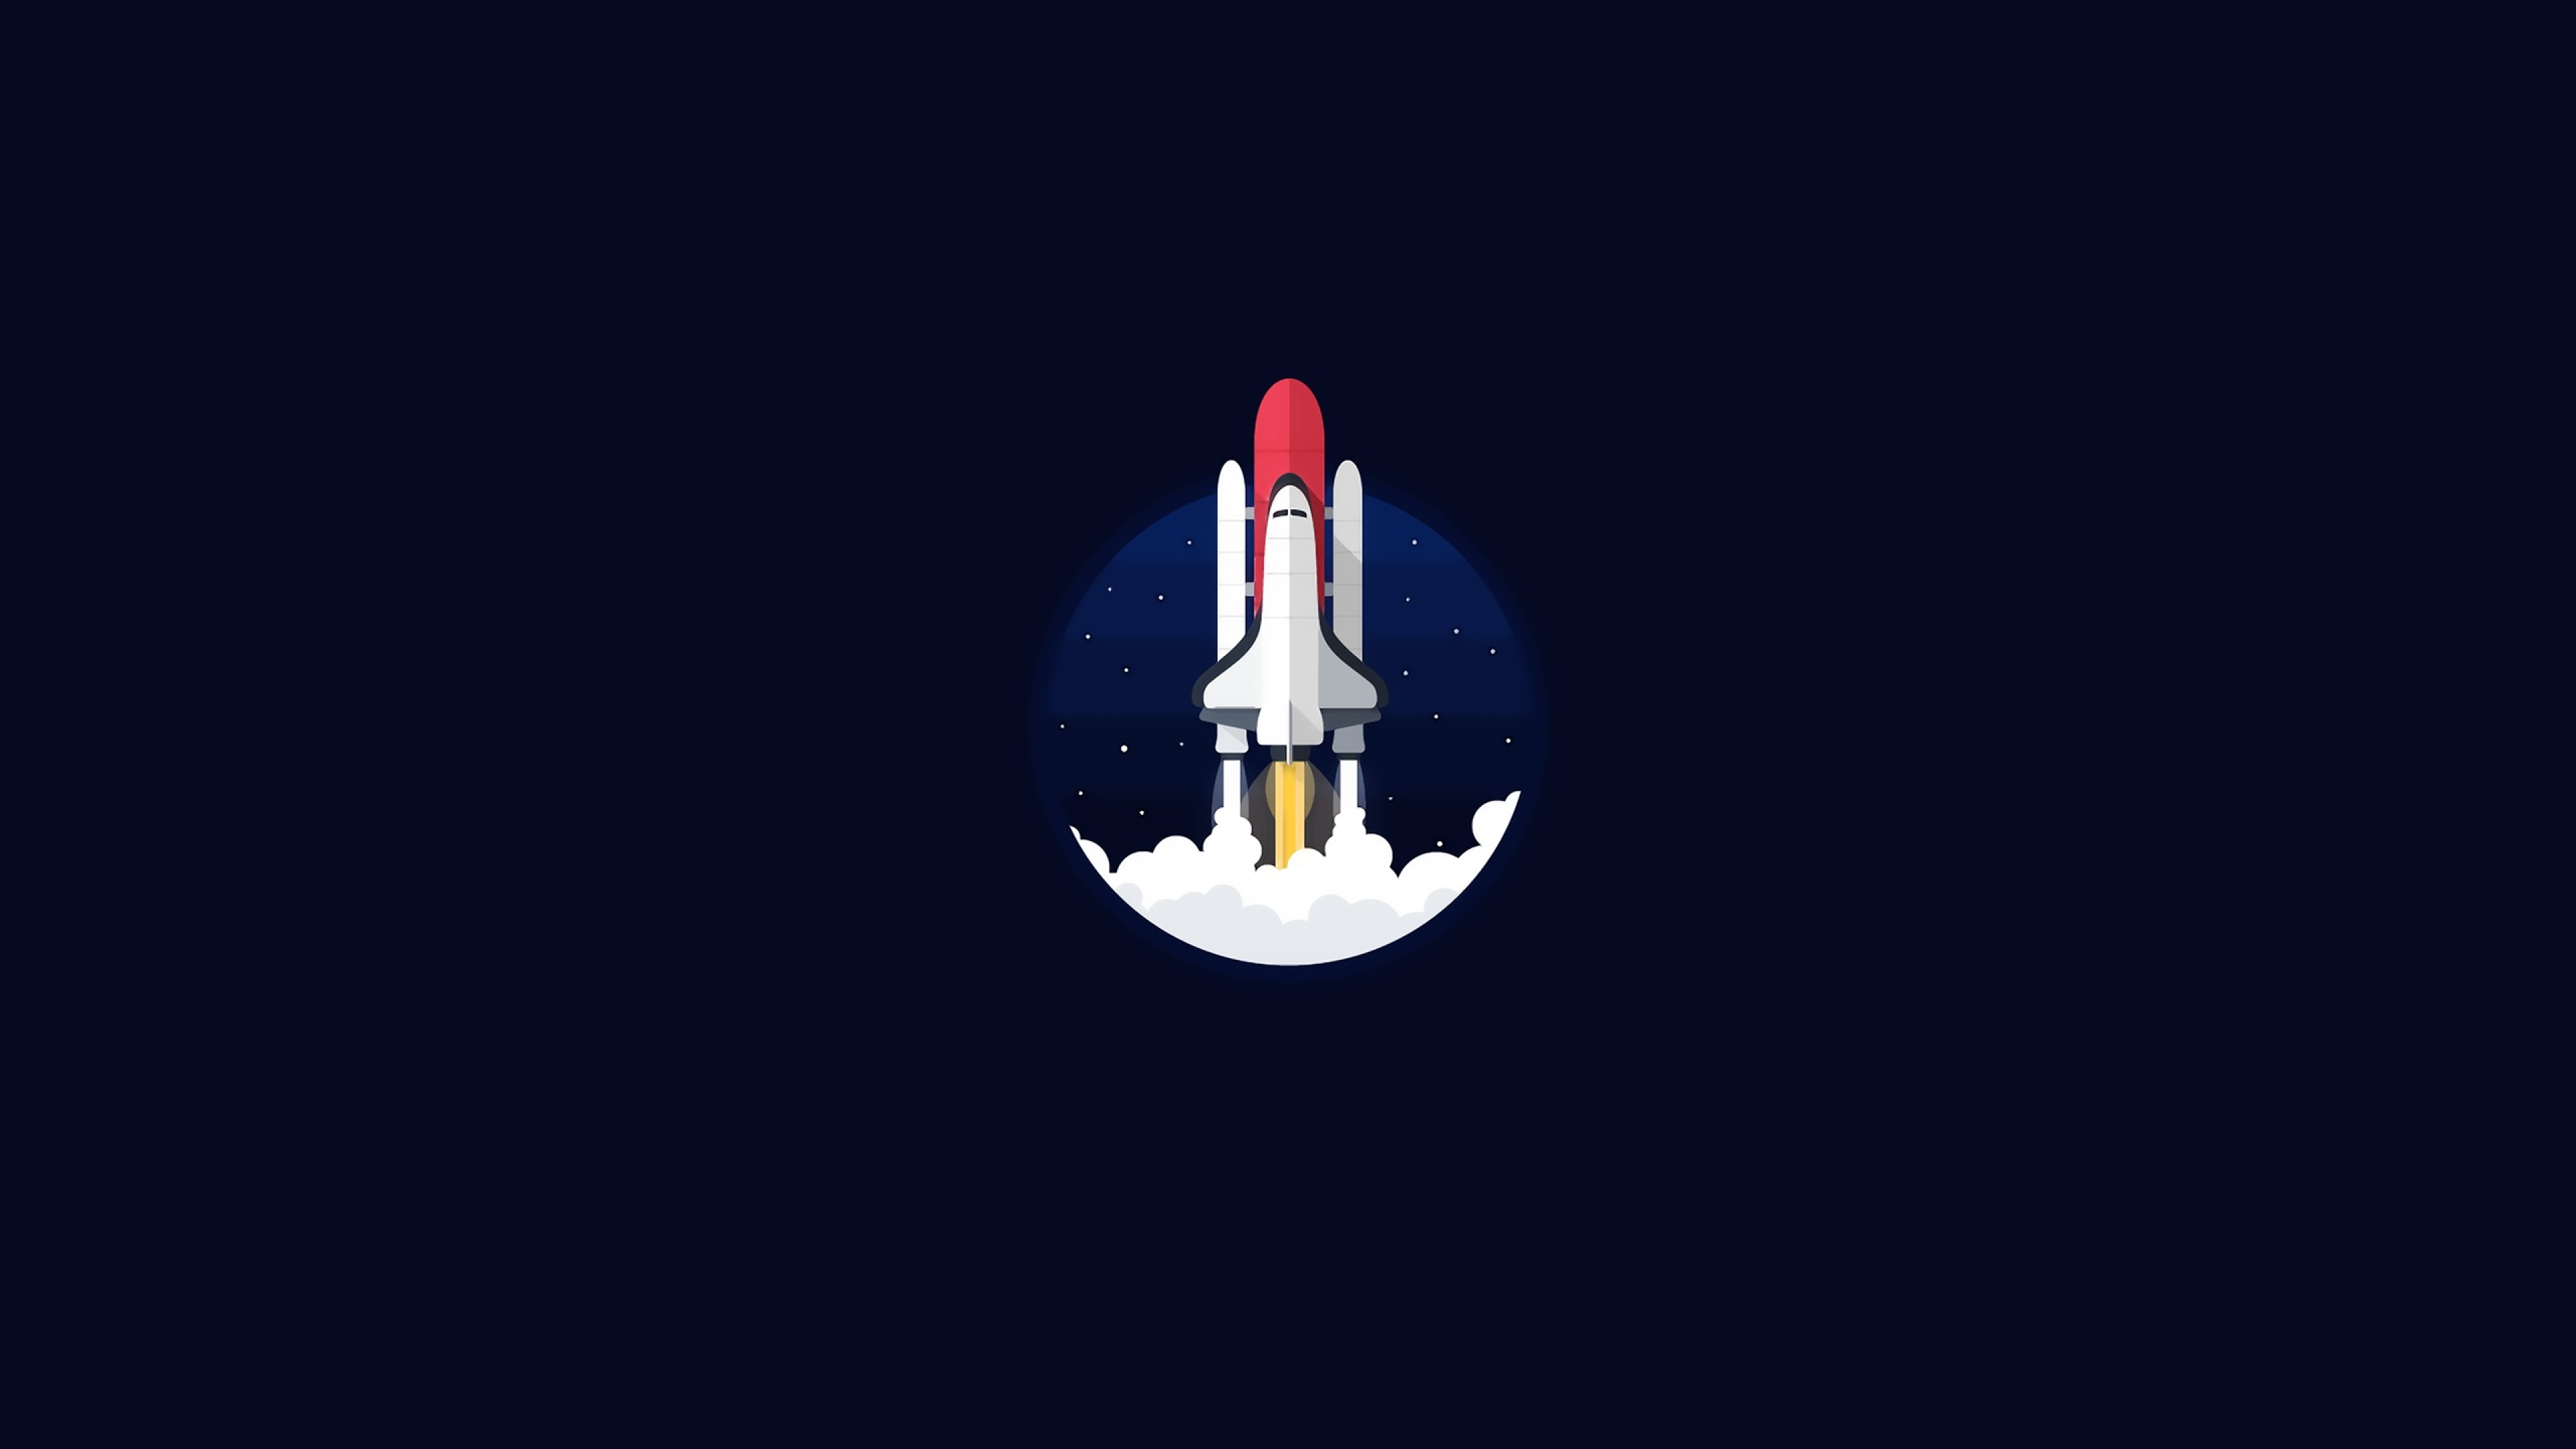 Space Shuttle Wallpaper iPhone - Pics about space